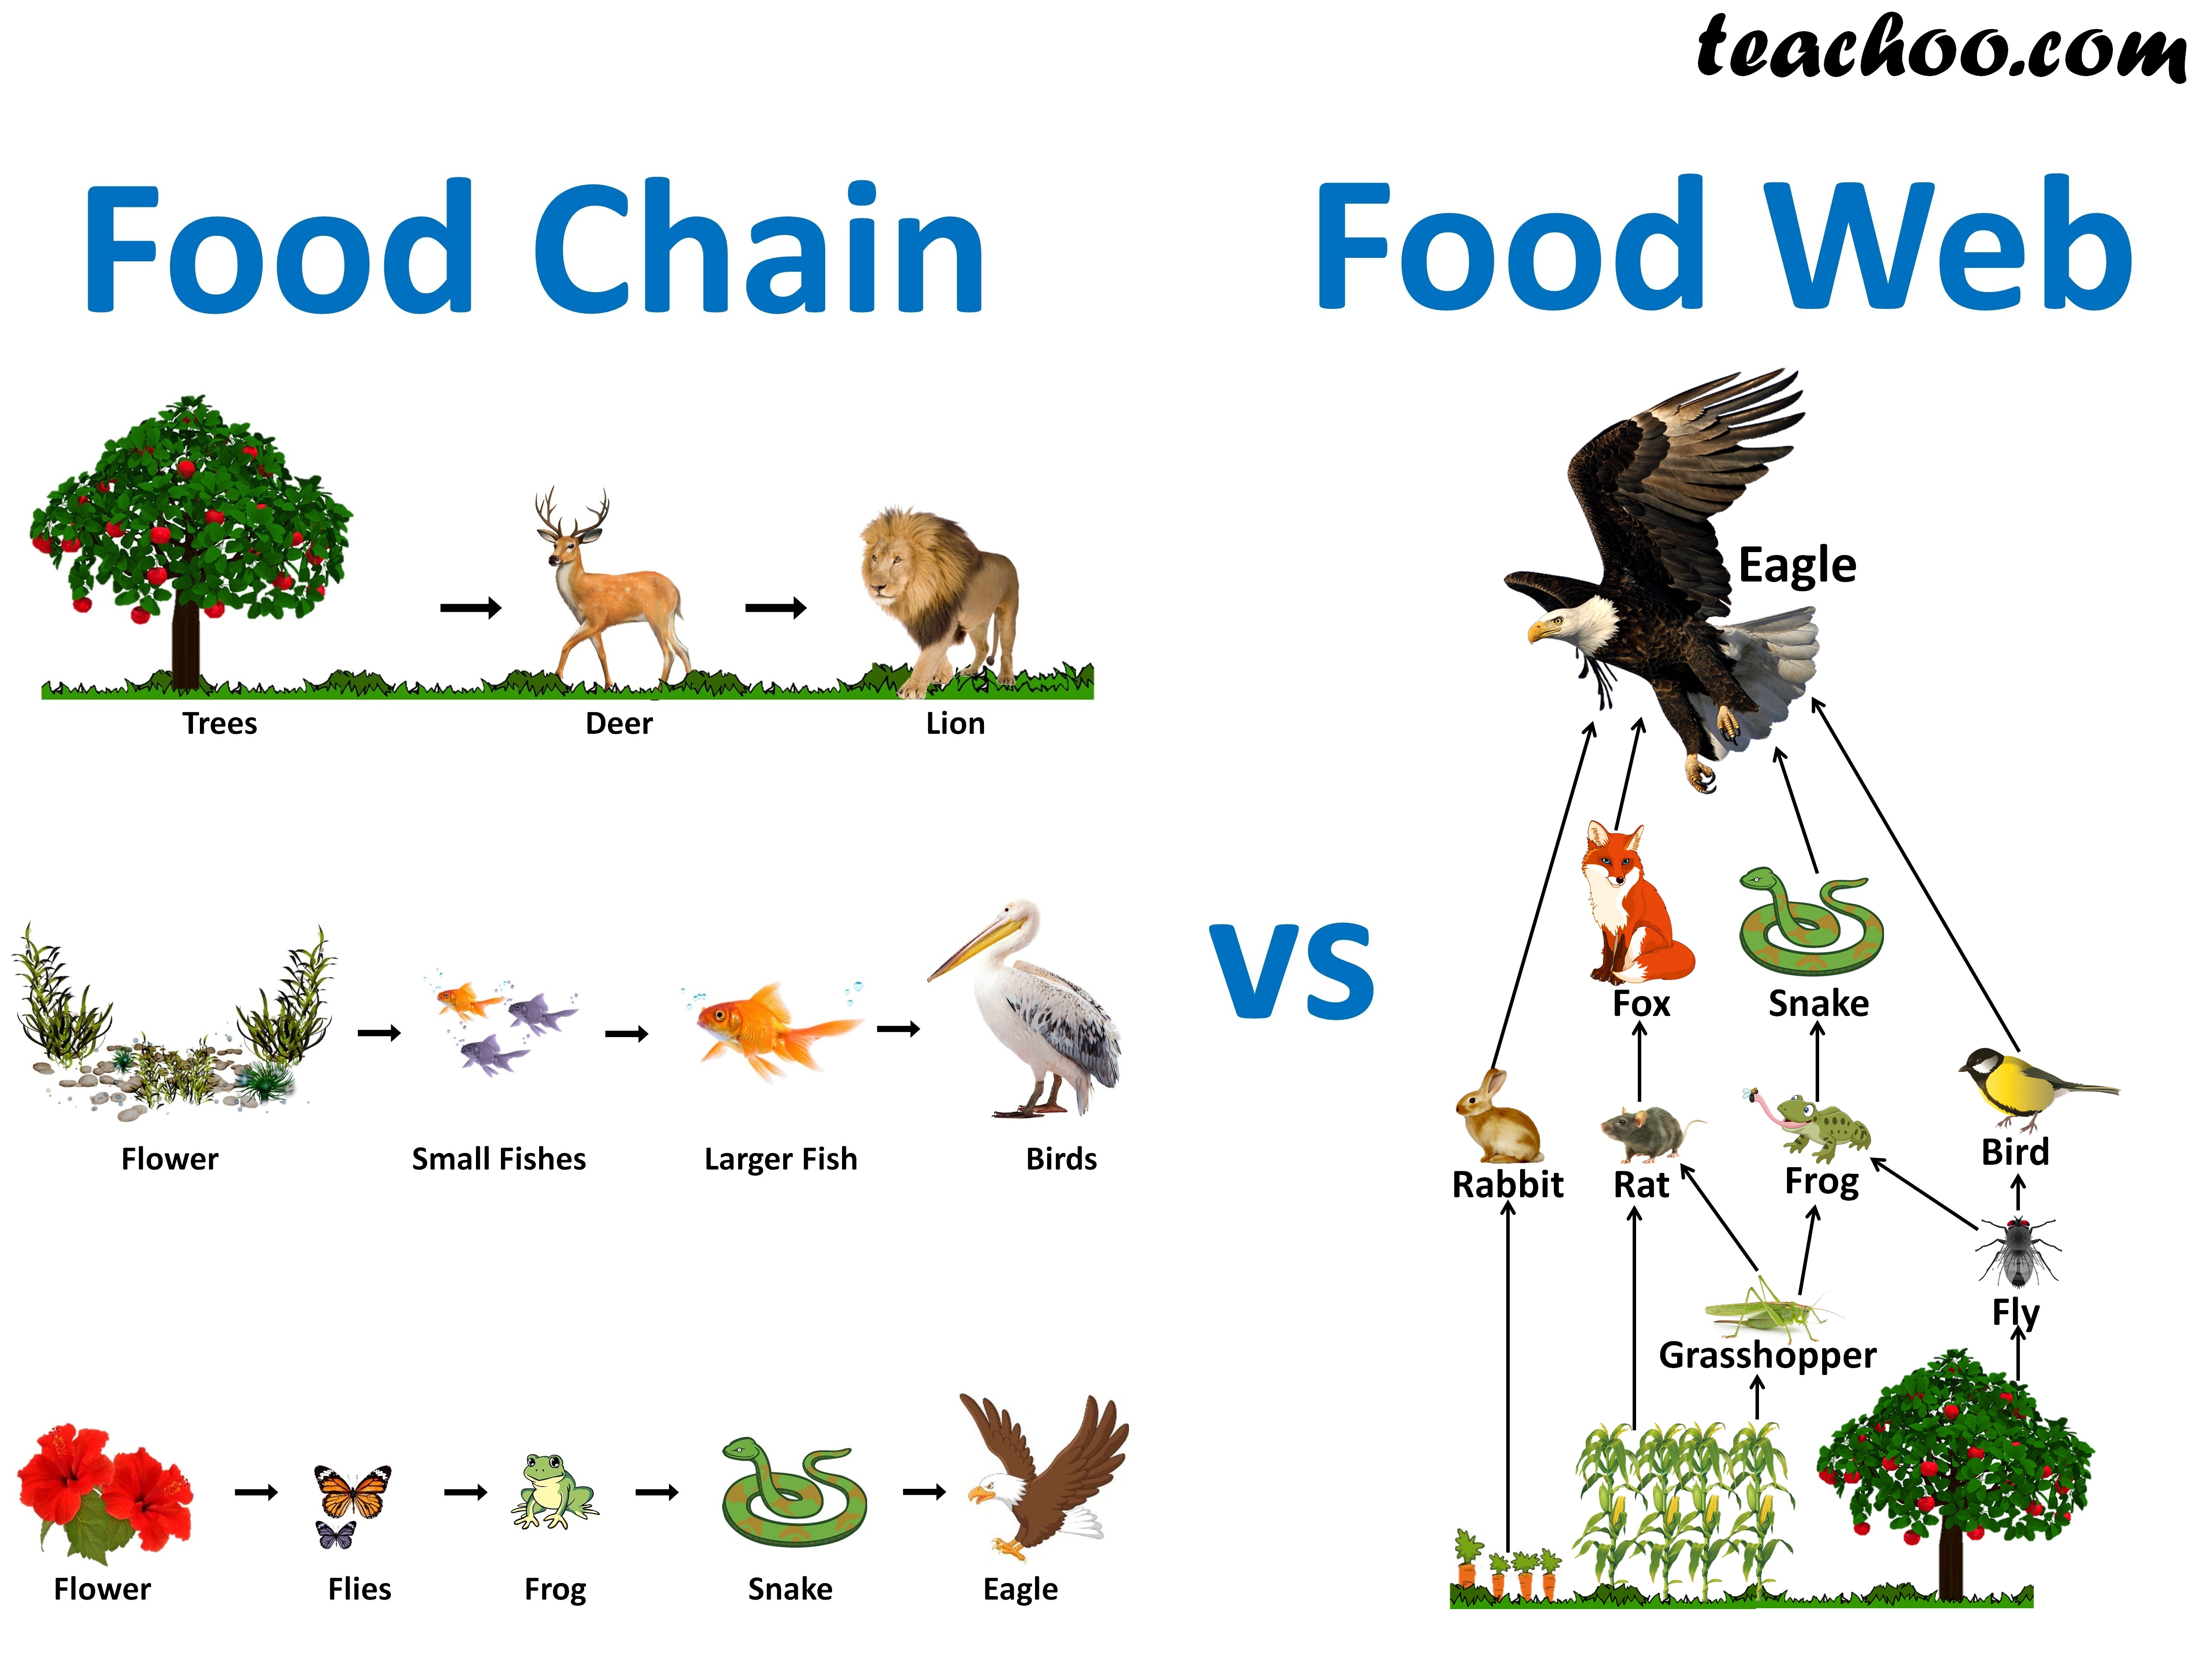 What is the difference between Food Chain and Food Web